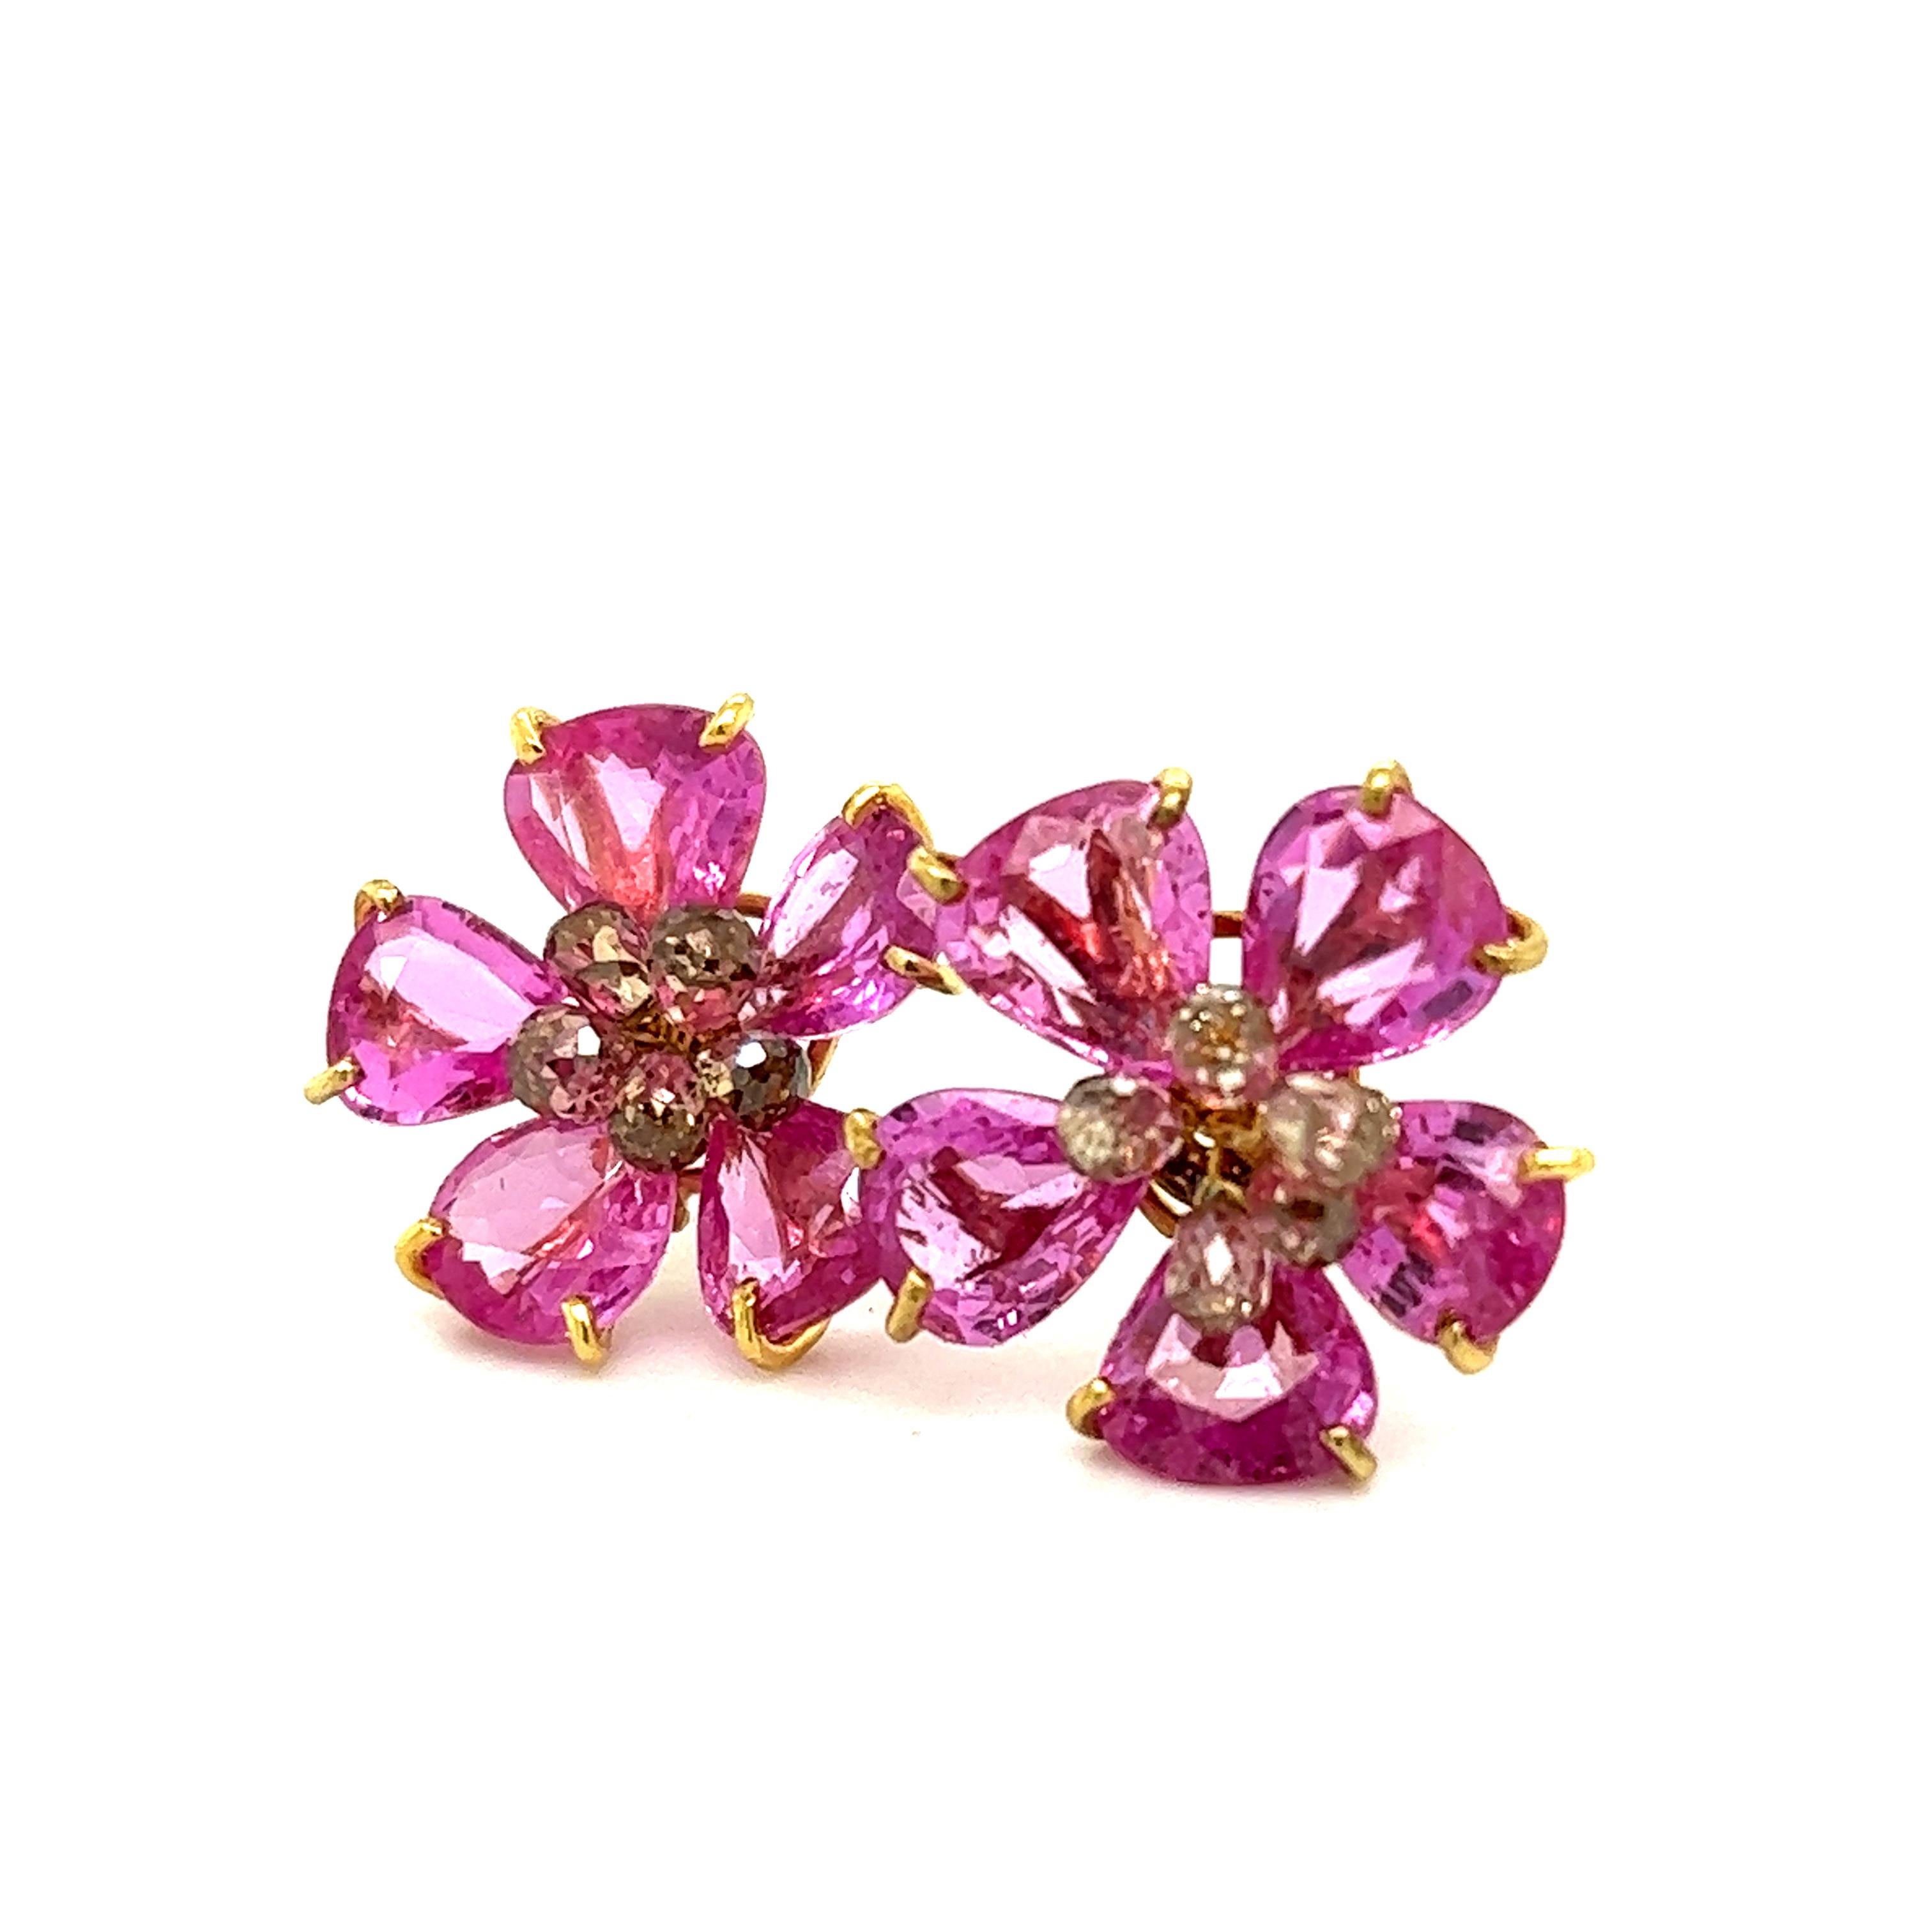 One hand crafted pair of earrings made in 18k yellow gold. The pair are floral themed and set with natural pink sapphire gemstones and champagne colored diamonds.
The earrings are set with ten pear shaped pink sapphire gemstones that display a